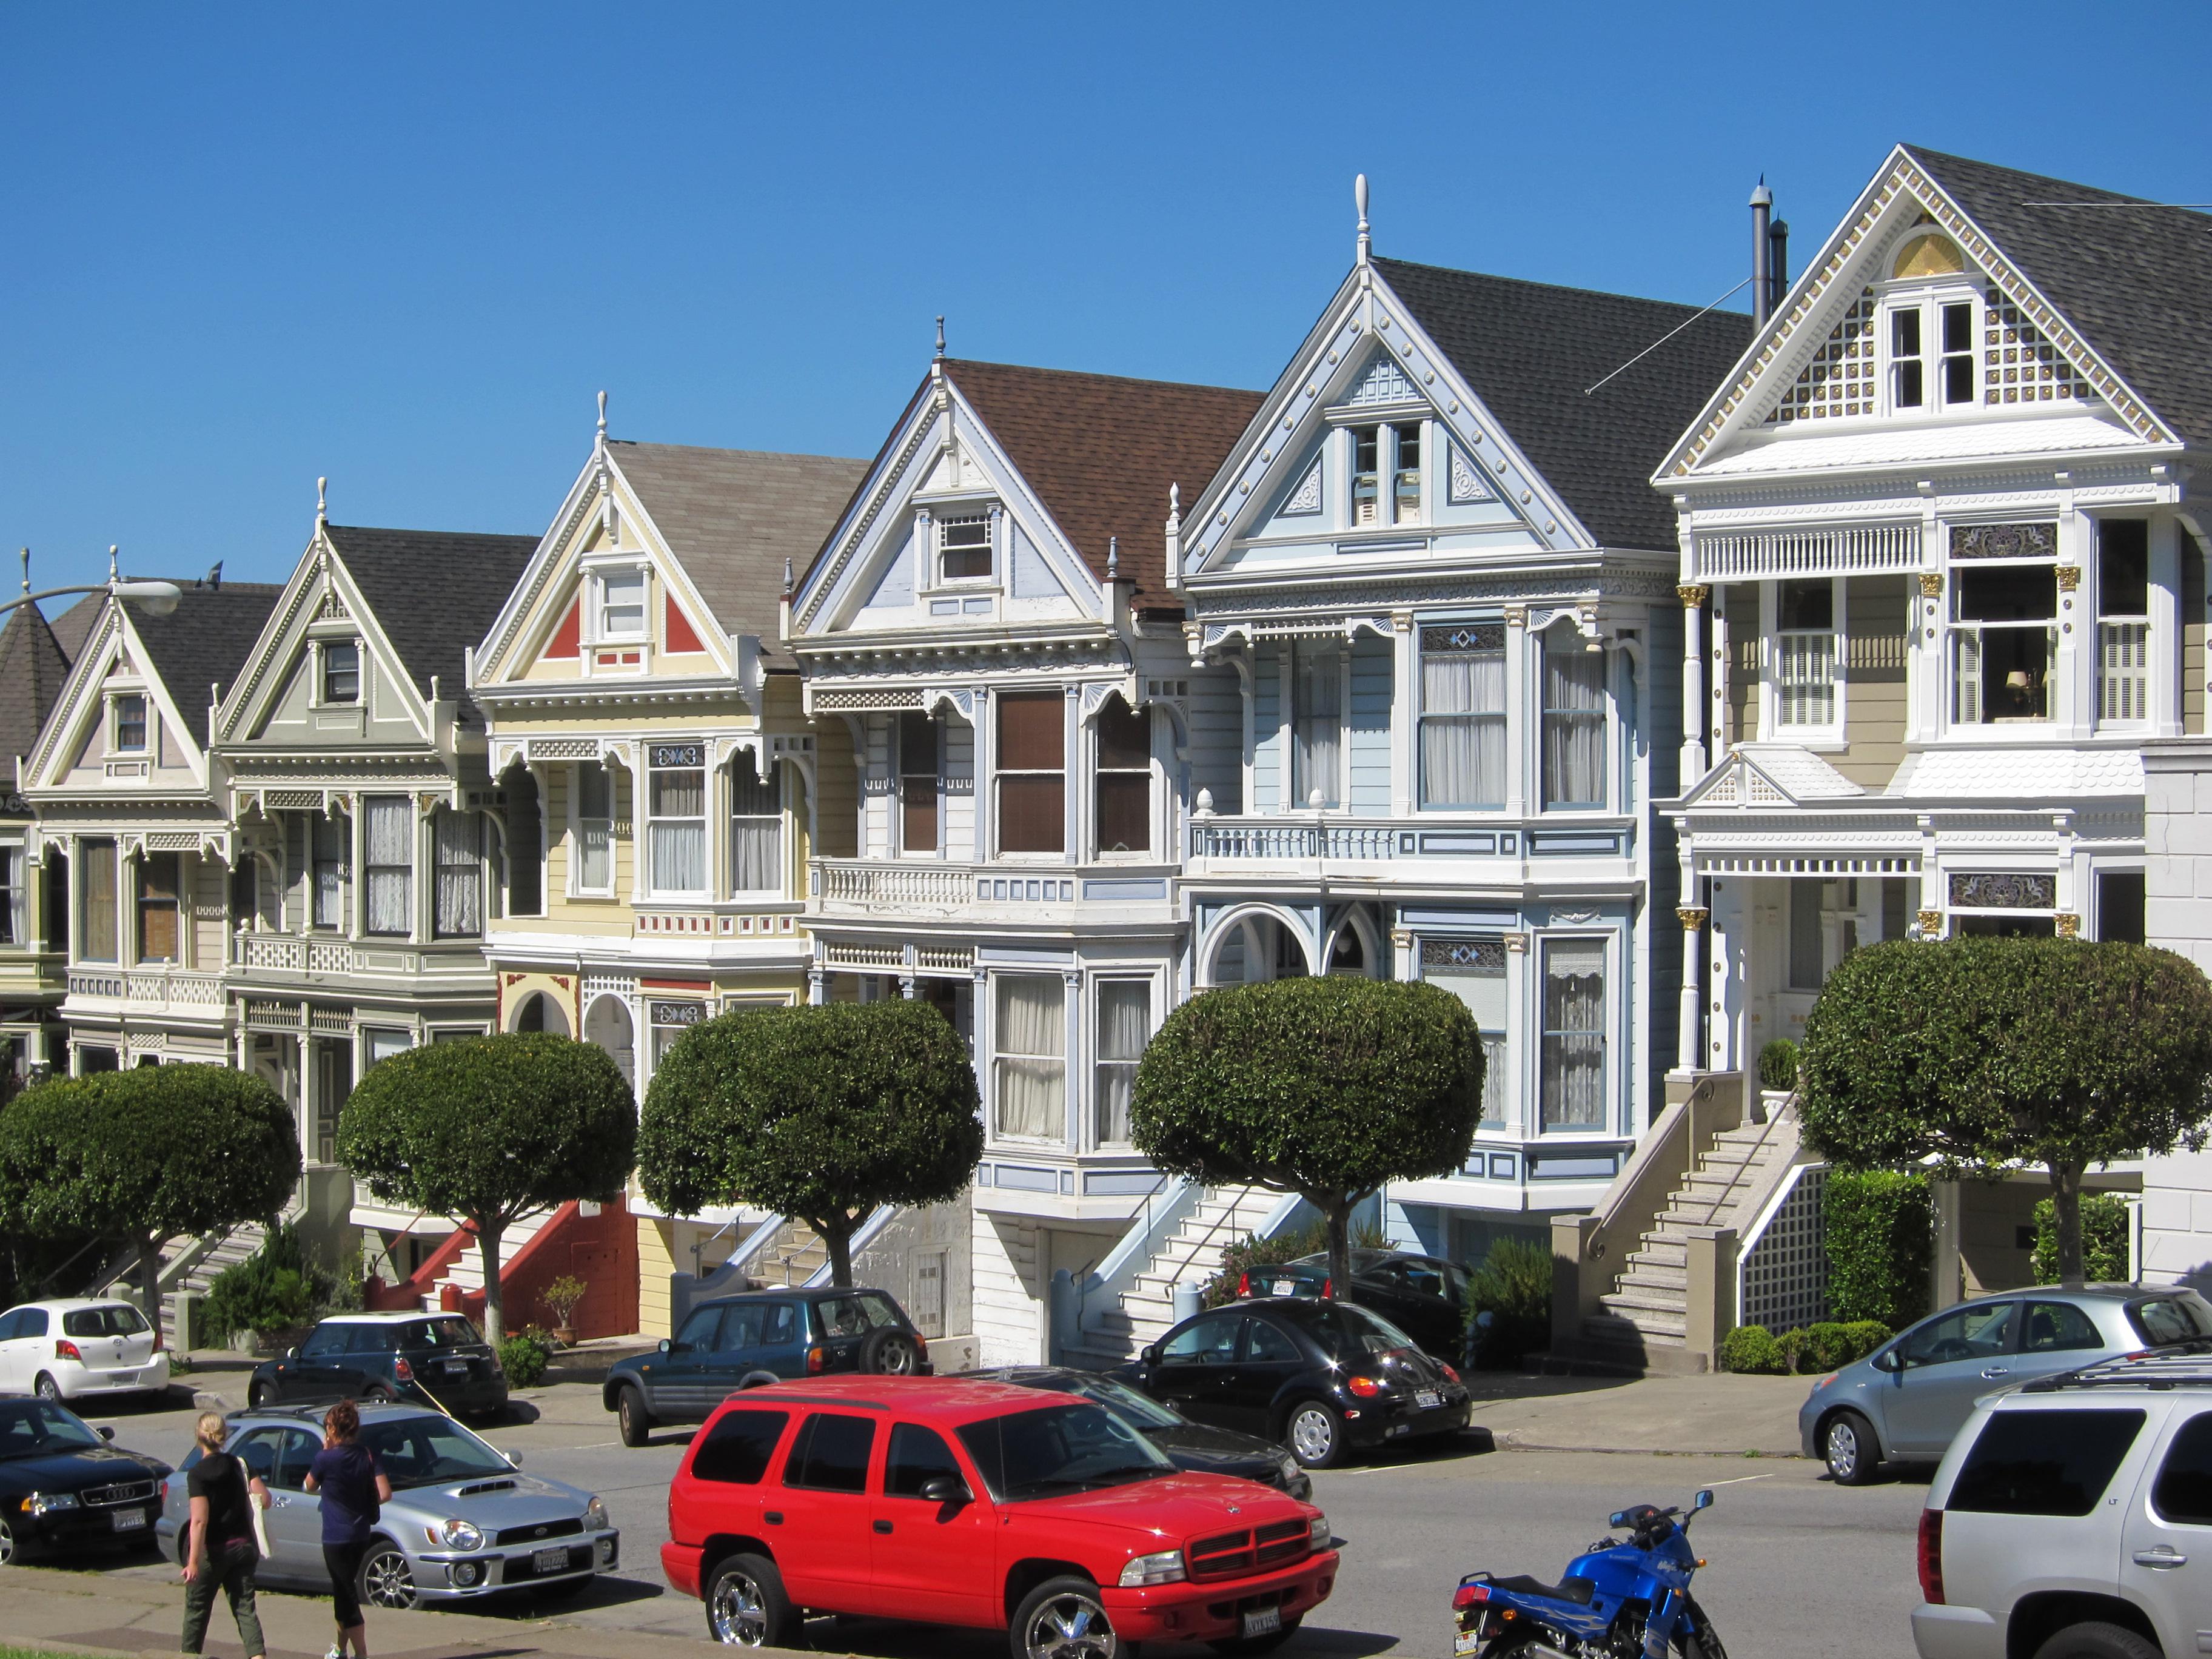 Photograph of the Painted Ladies, 6 painted Victorian houses located at Alamo Square in San Francisco